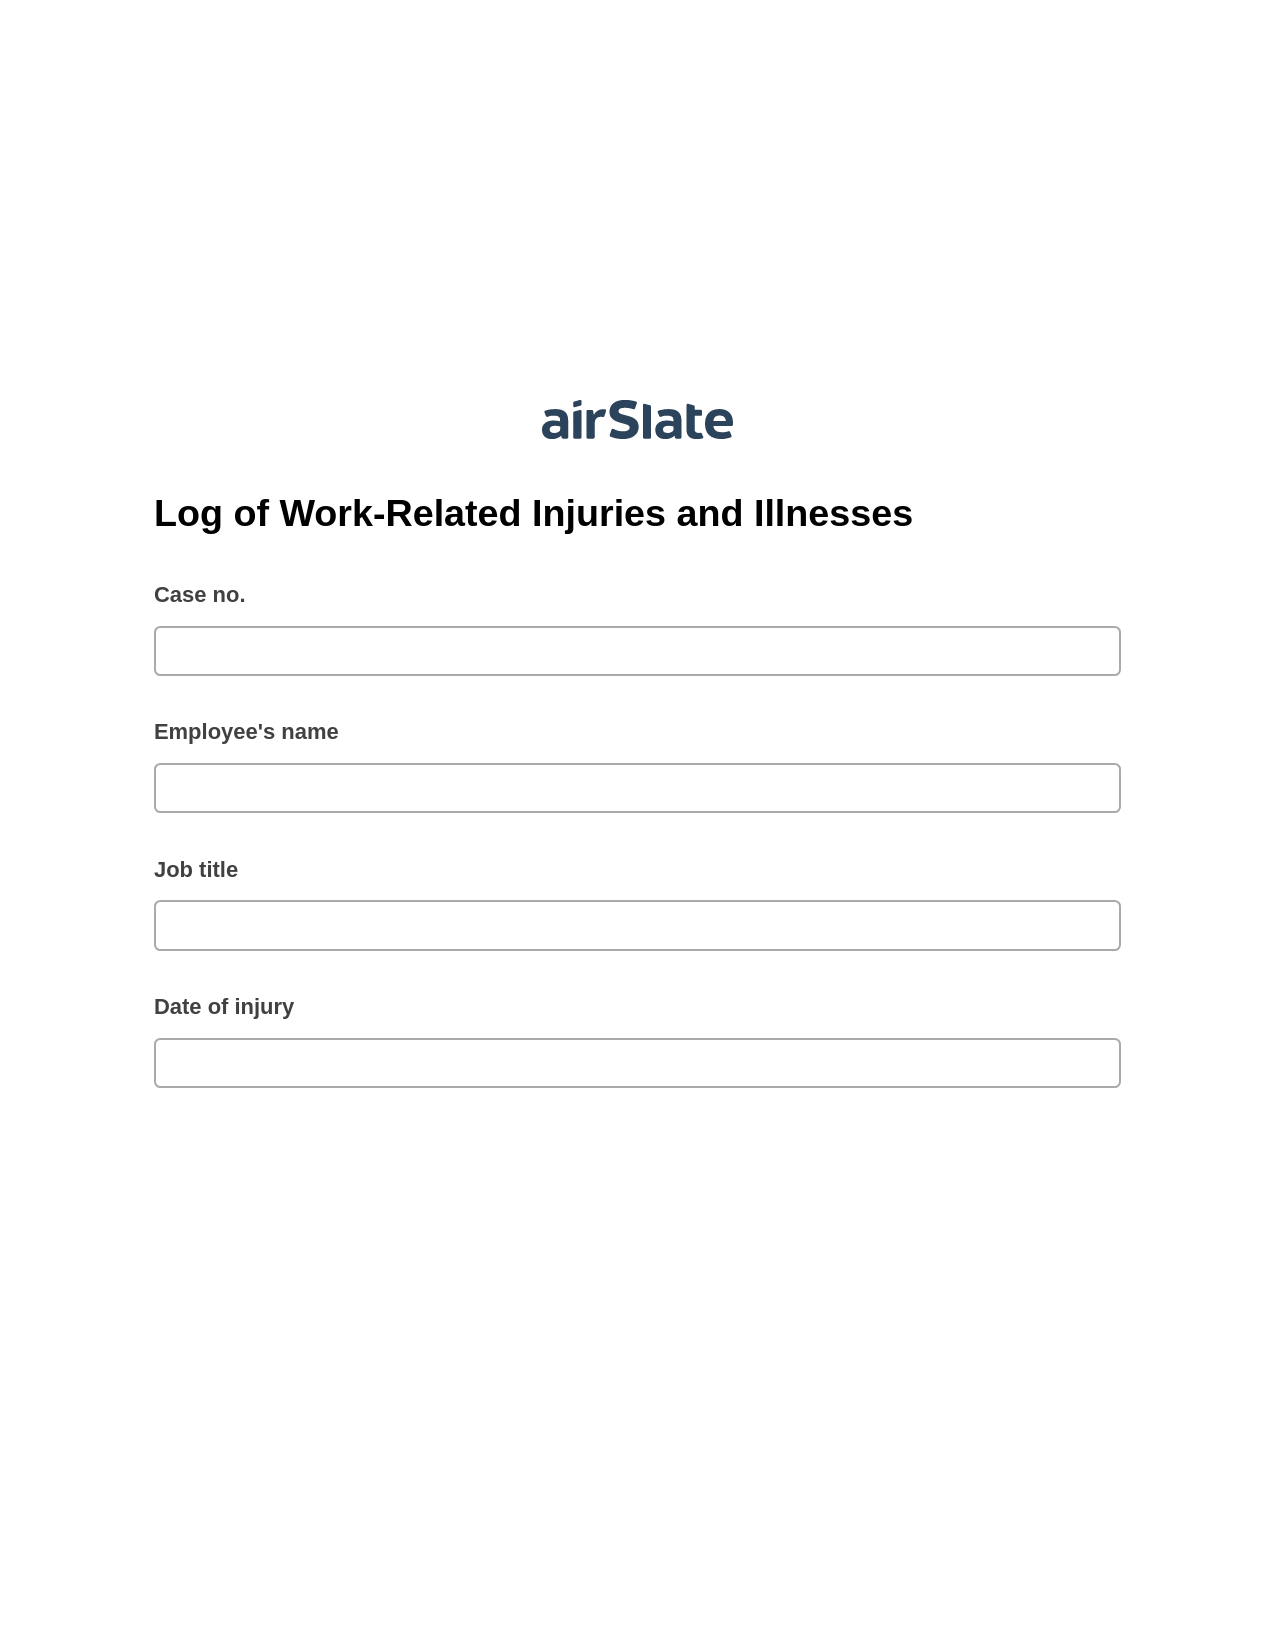 Log of Work-Related Injuries and Illnesses Pre-fill from Salesforce Record Bot, Email Notification Bot, Slack Notification Postfinish Bot